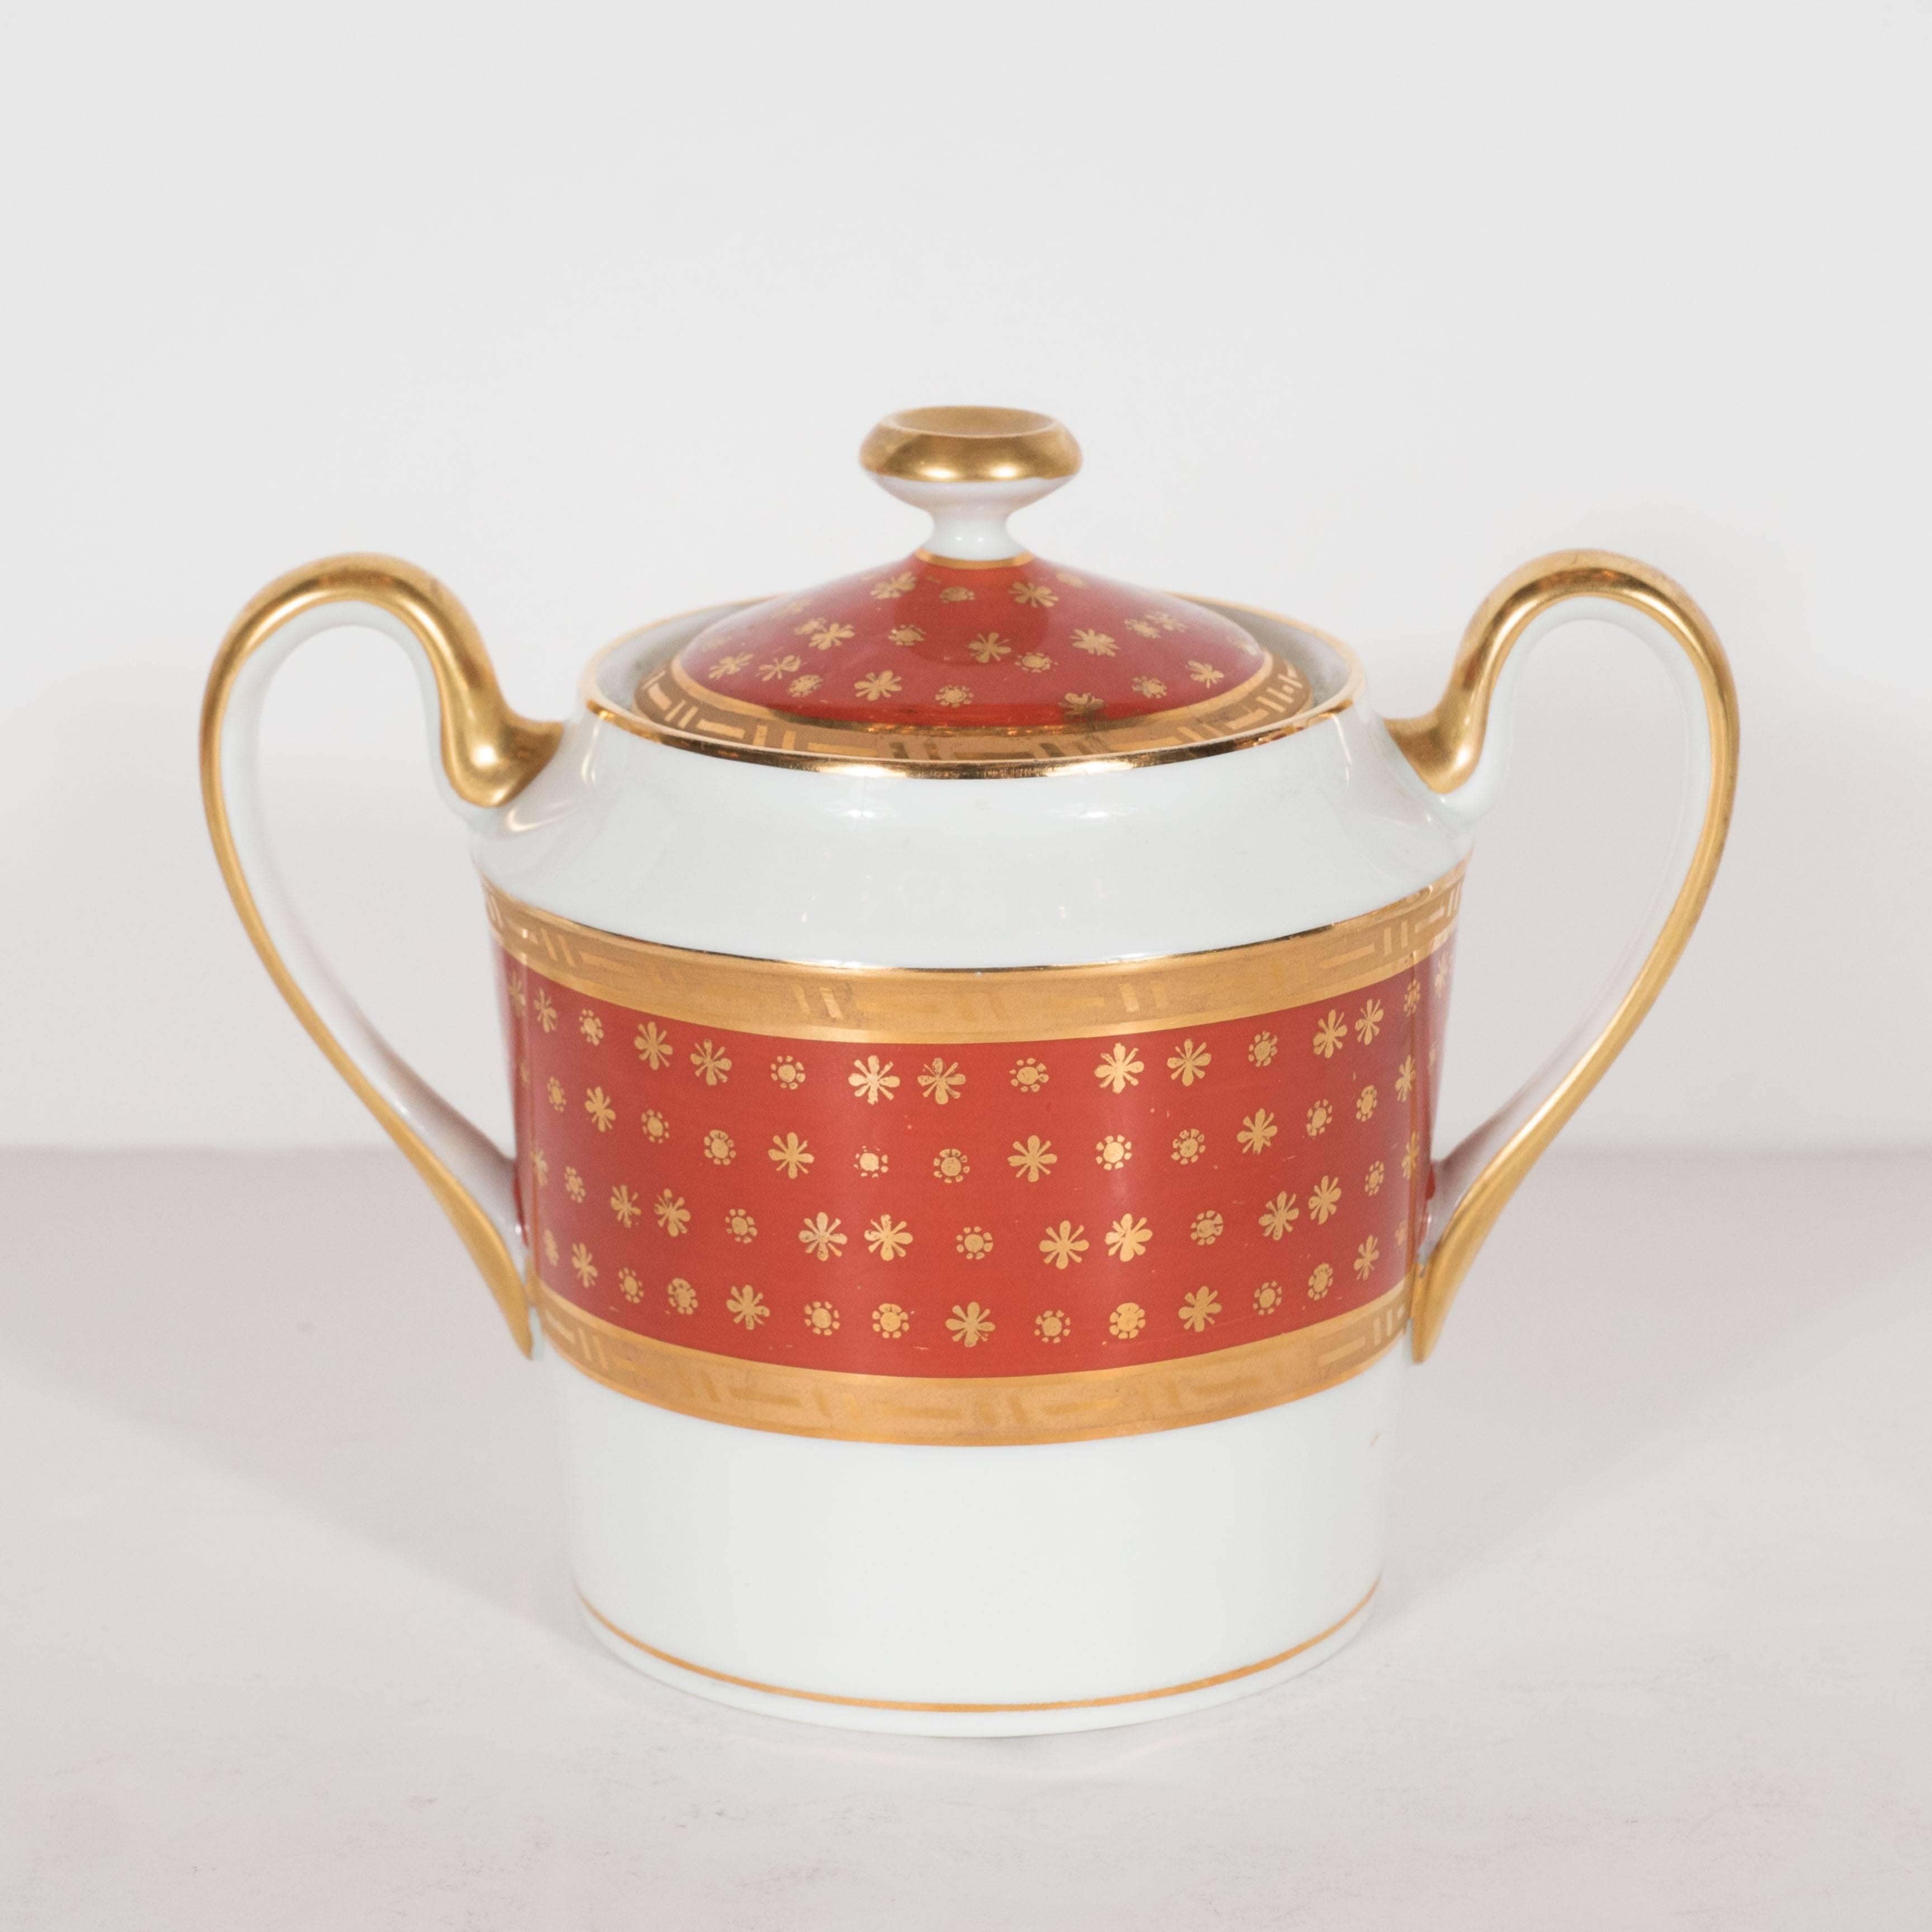 This stunning coffee service by Giraud Limoges features 12 demitasse cups with accompanying saucers, coffee pot, sugar bowl, and creamer. They are feature rich carnelian band inscribed with stylized Fleur-de-Lis, abstracted floral patterns and